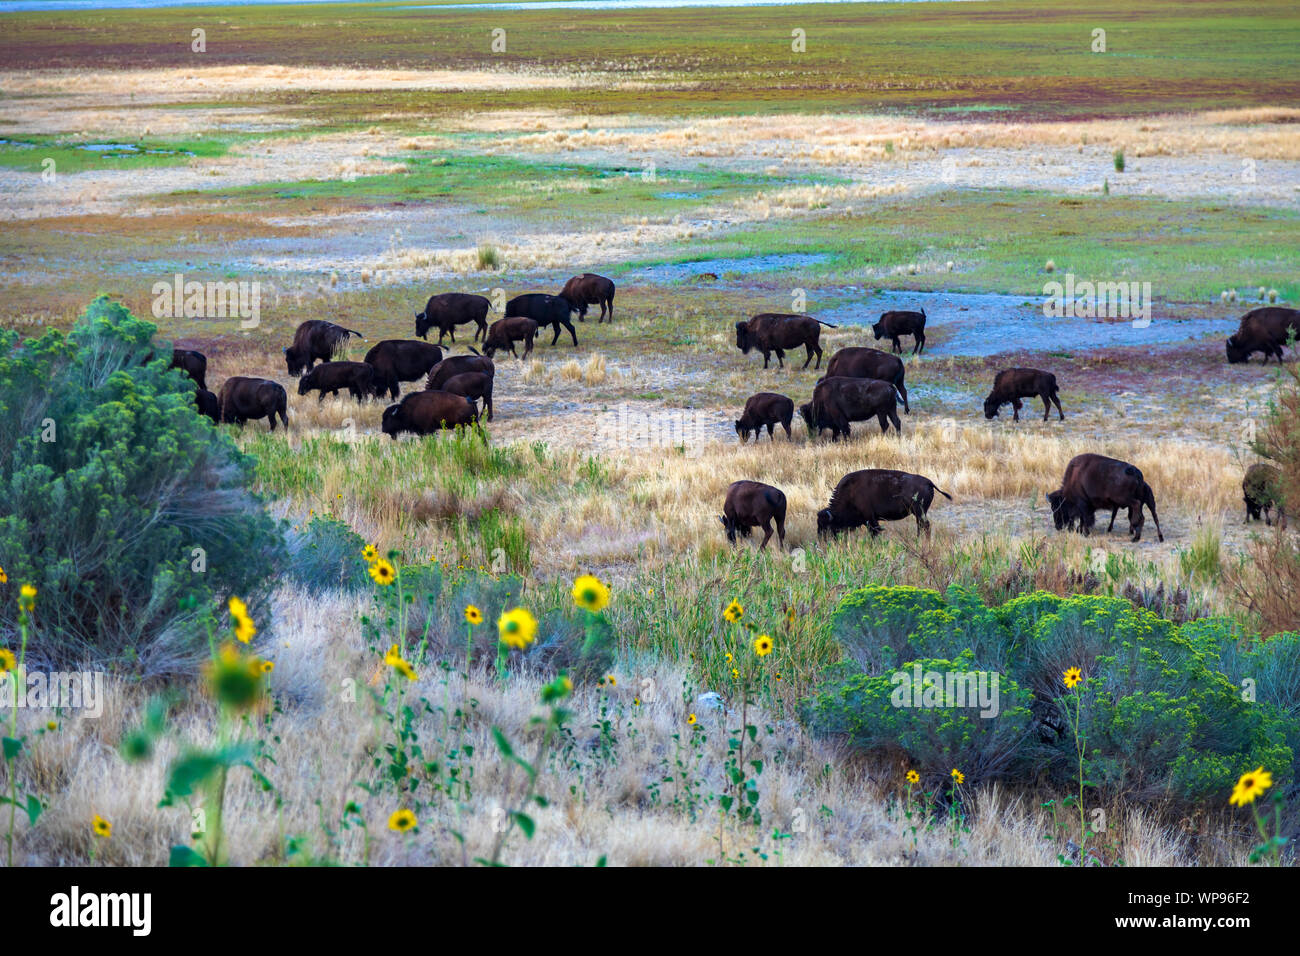 In this shot a herd of American Bison ((Bison bison) as they graze in the Buffalo Bay area on Antelope Island State Park, Utah, USA. Stock Photo